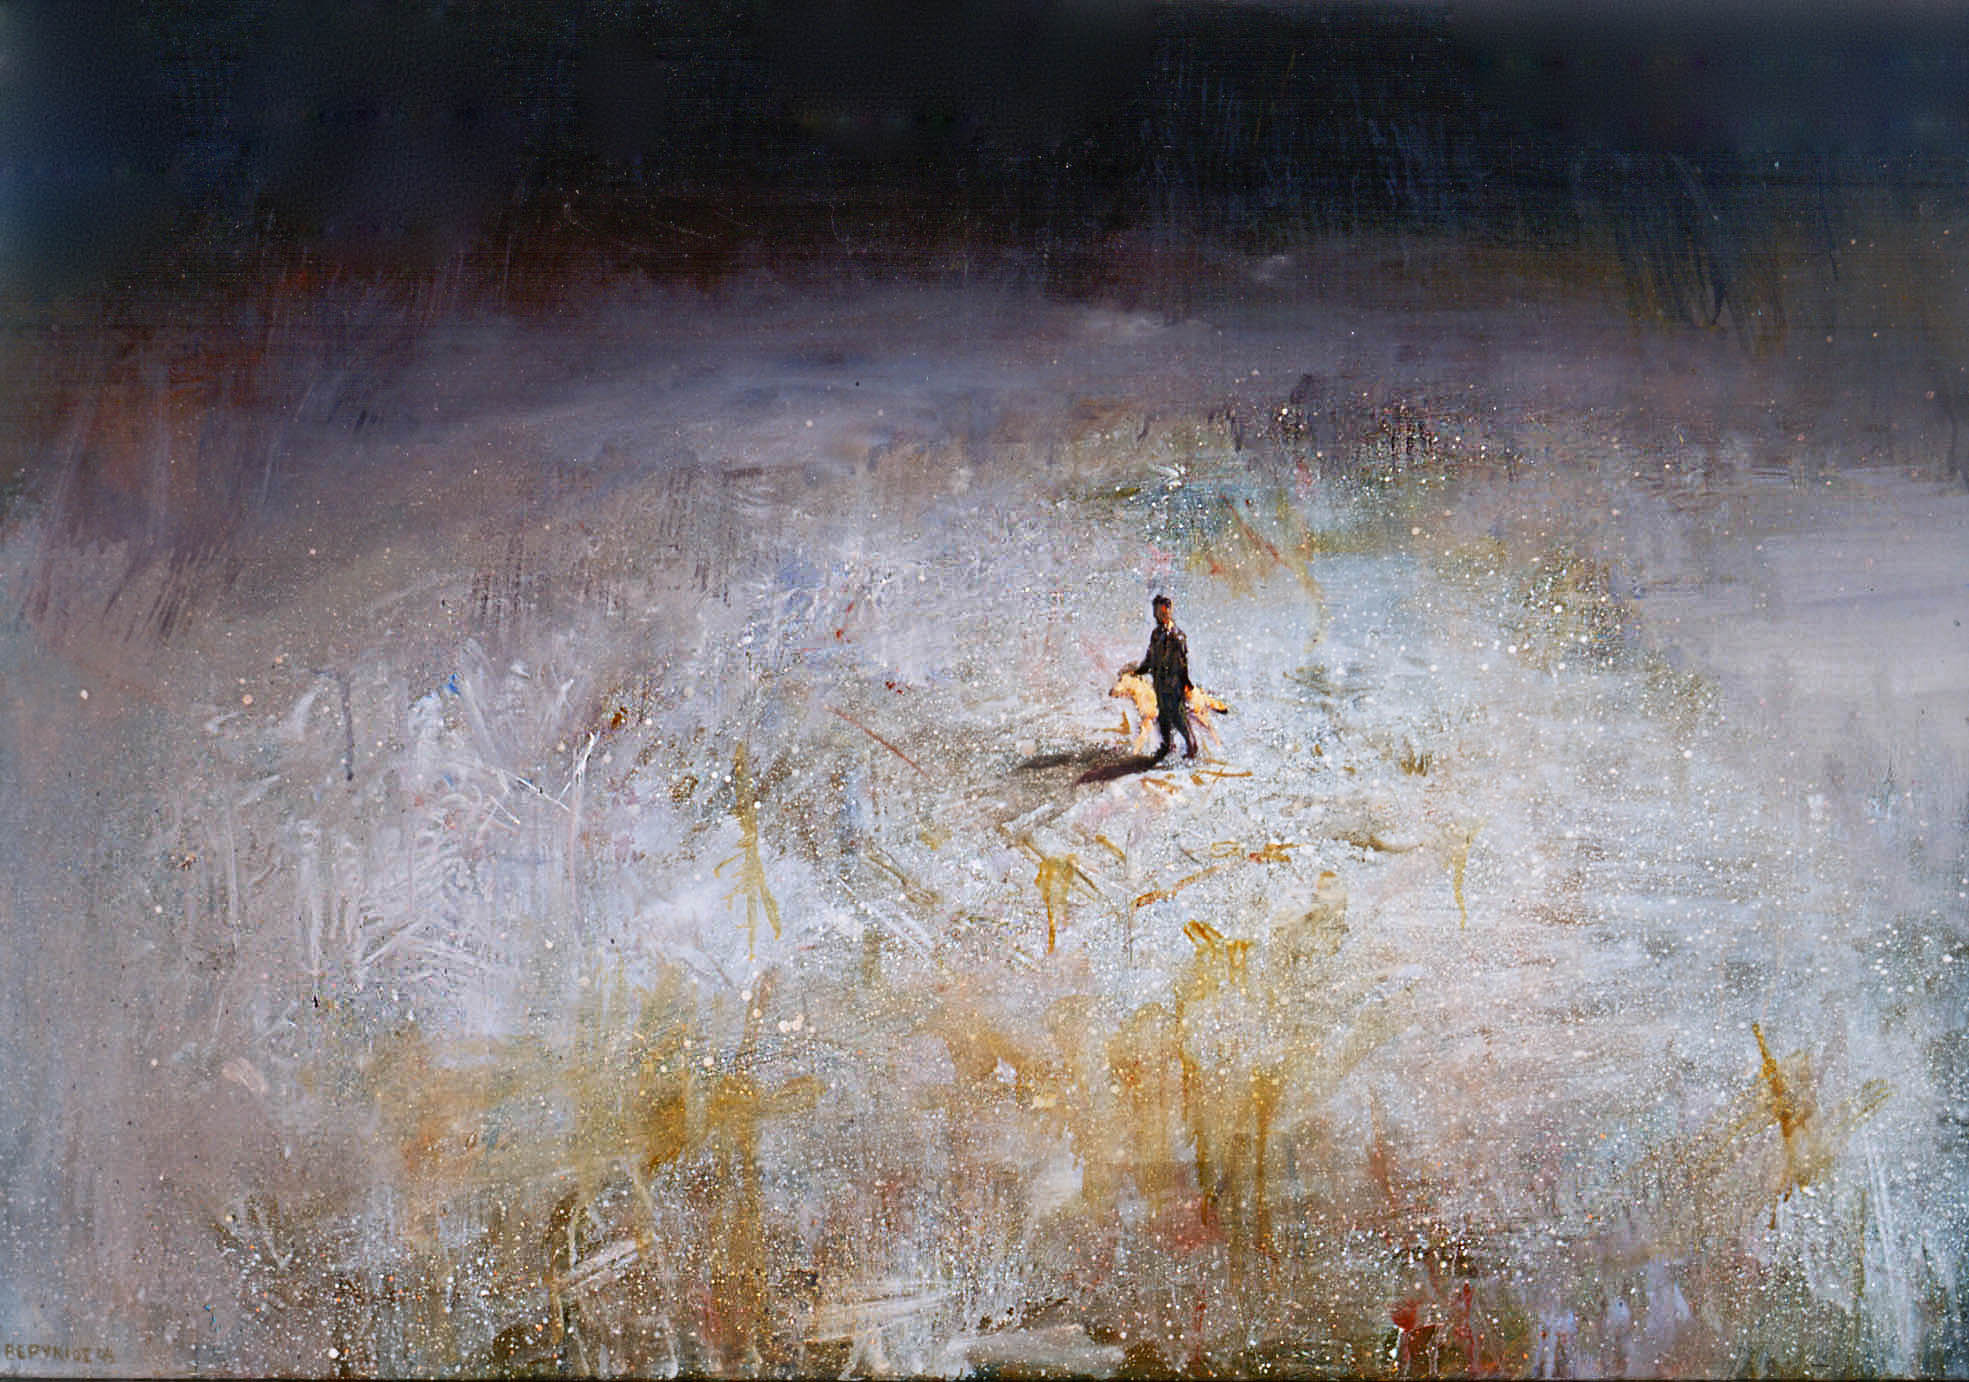 "Me and the dog 3", 1996, Oil on canvas, 50 cm X 70 cm